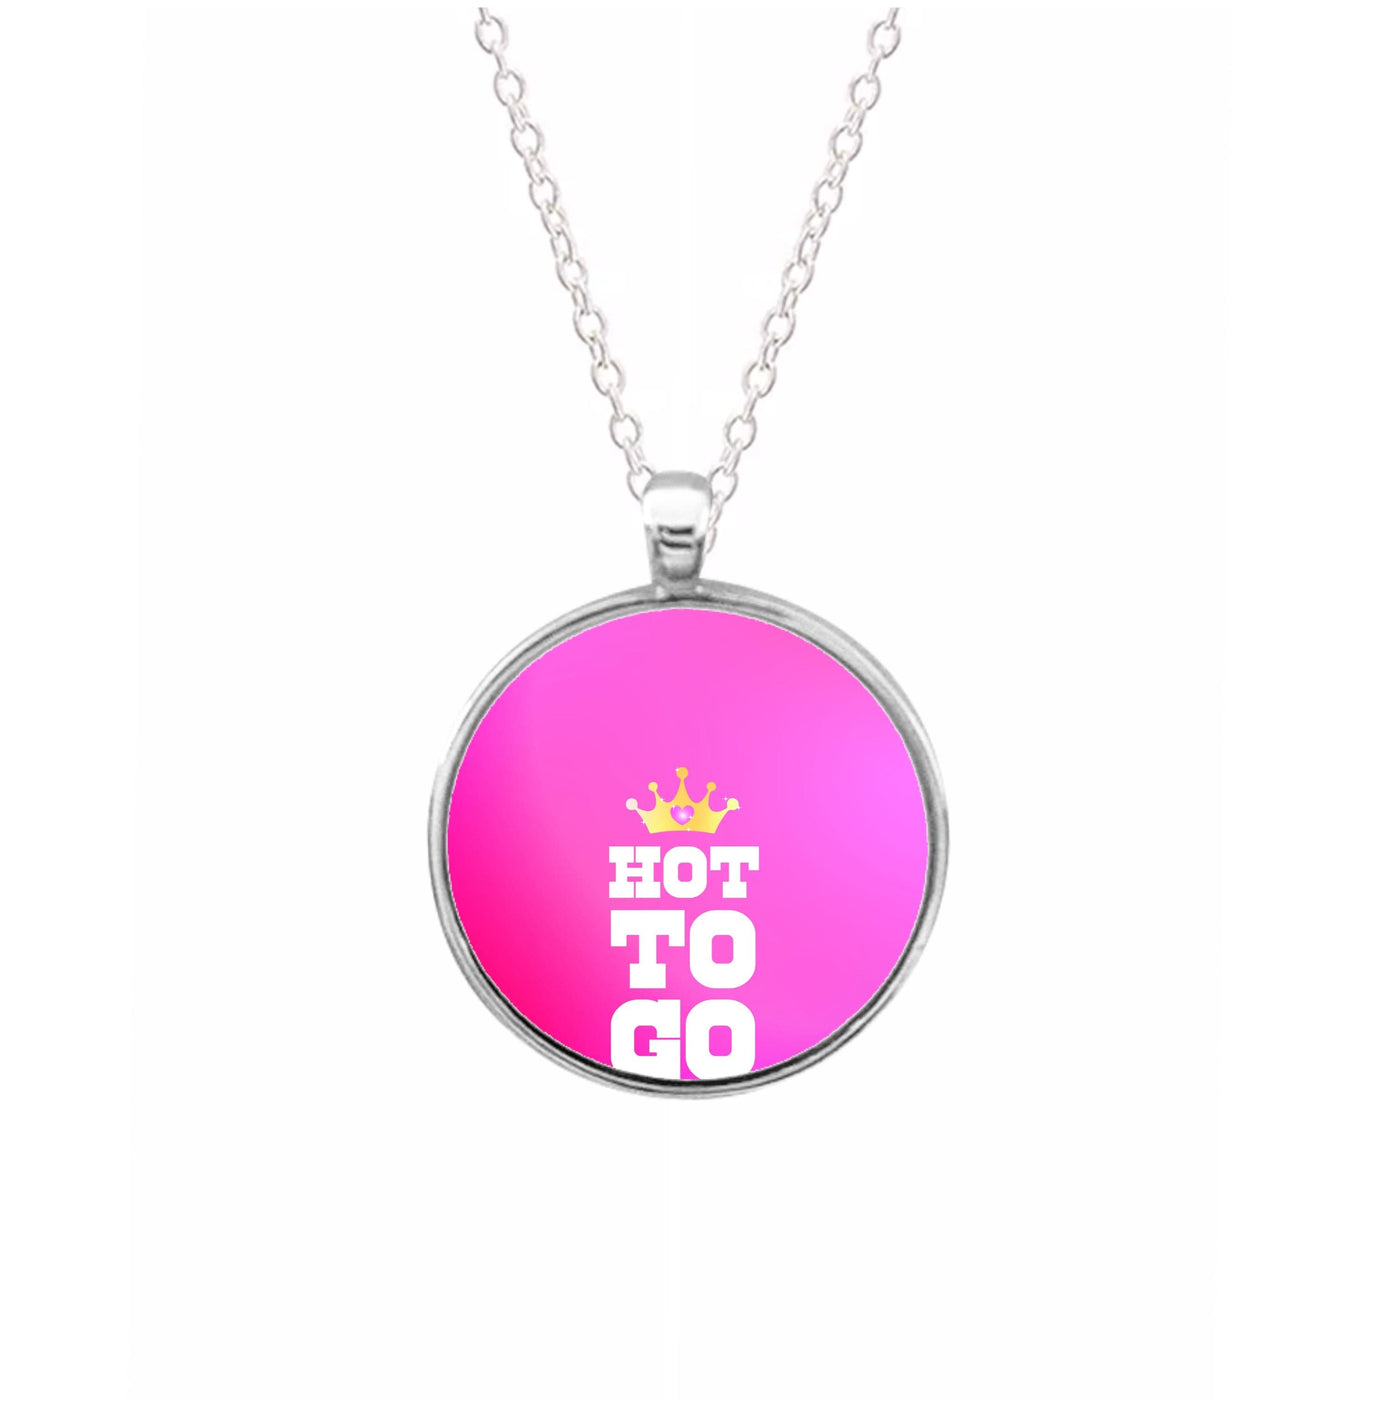 Hot To Go - Chappell Roan Necklace